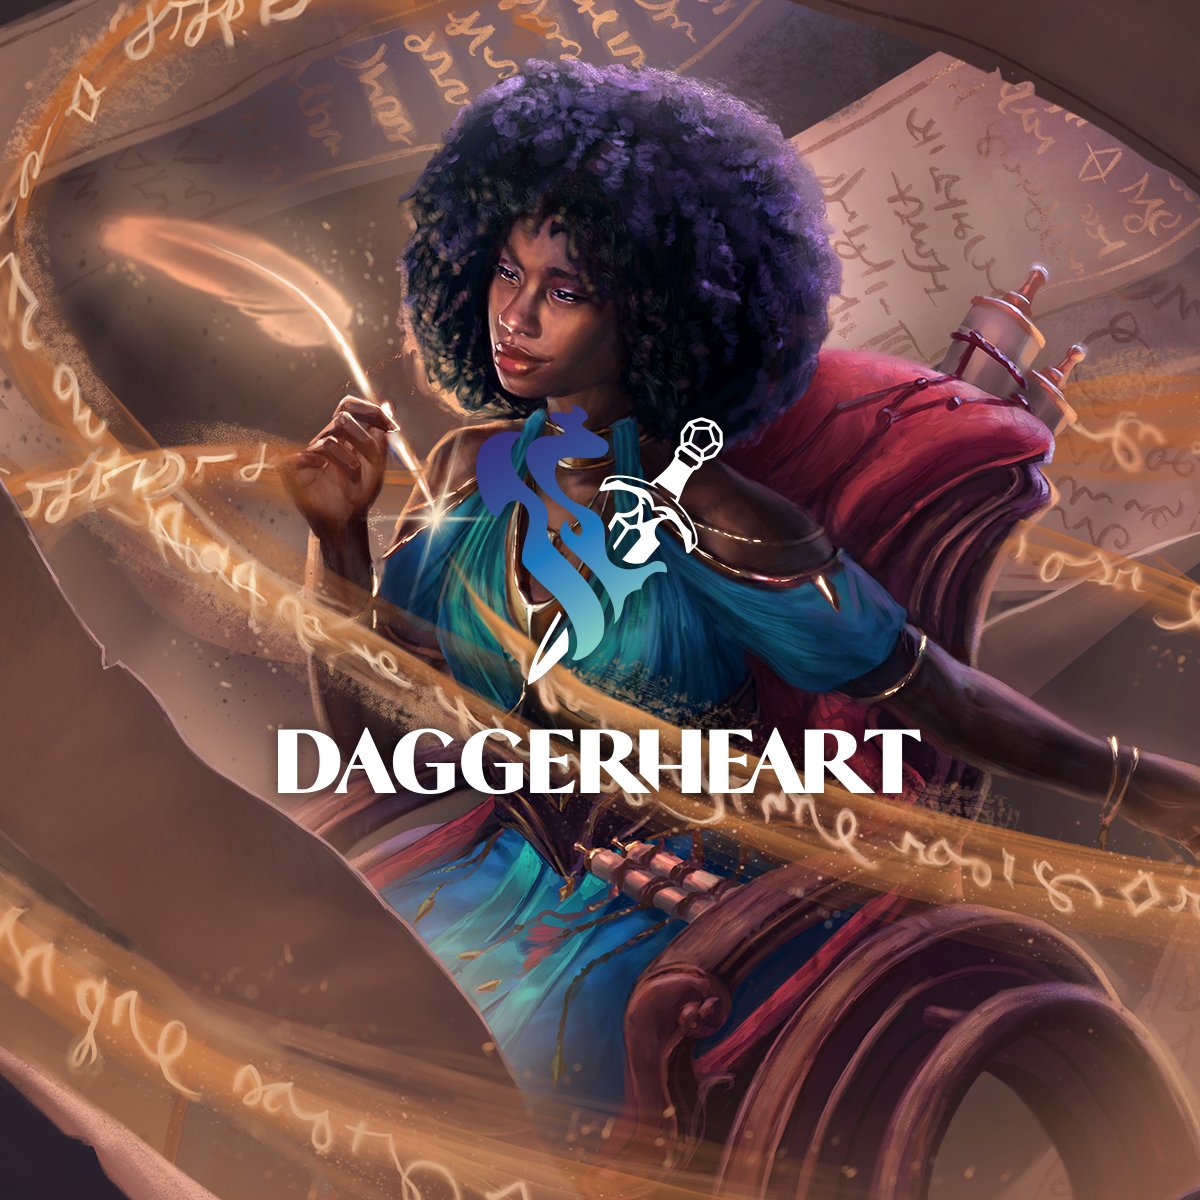 📢Calling all Storytellers! ✒️ The Open Beta Playtest for DAGGERHEART 🗡️❤️‍🔥 is coming March 12! Come create your character and then try and break our newest RPG. Get all the details here: critrole.com/hype-the-open-… Spellbinding artwork by Nikki Dawes @nikkidawesdraws